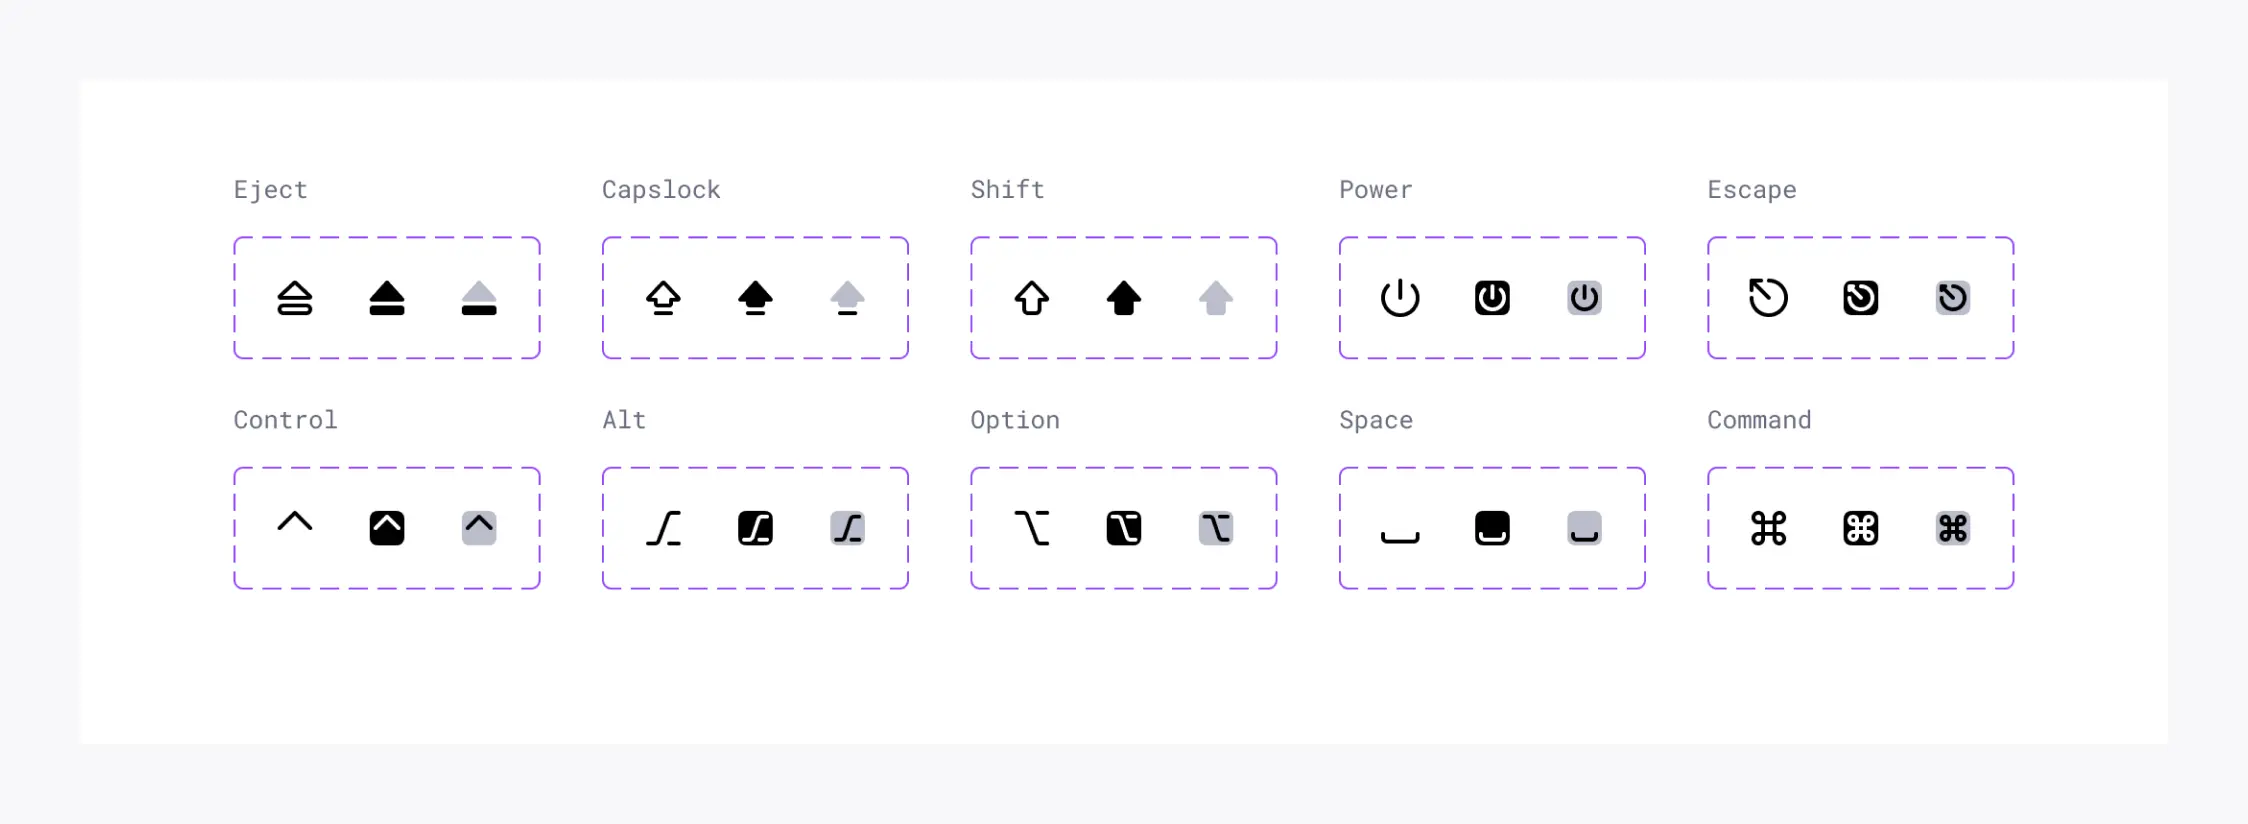 Keyboard icon set in Universal Icon Set in Figma. A set of keyboard key symbols grouped by Eject, Capslock, Shift, Power, Escape, Control, Alt, Option, Space, and Command. Each group shows different variations of the symbols.